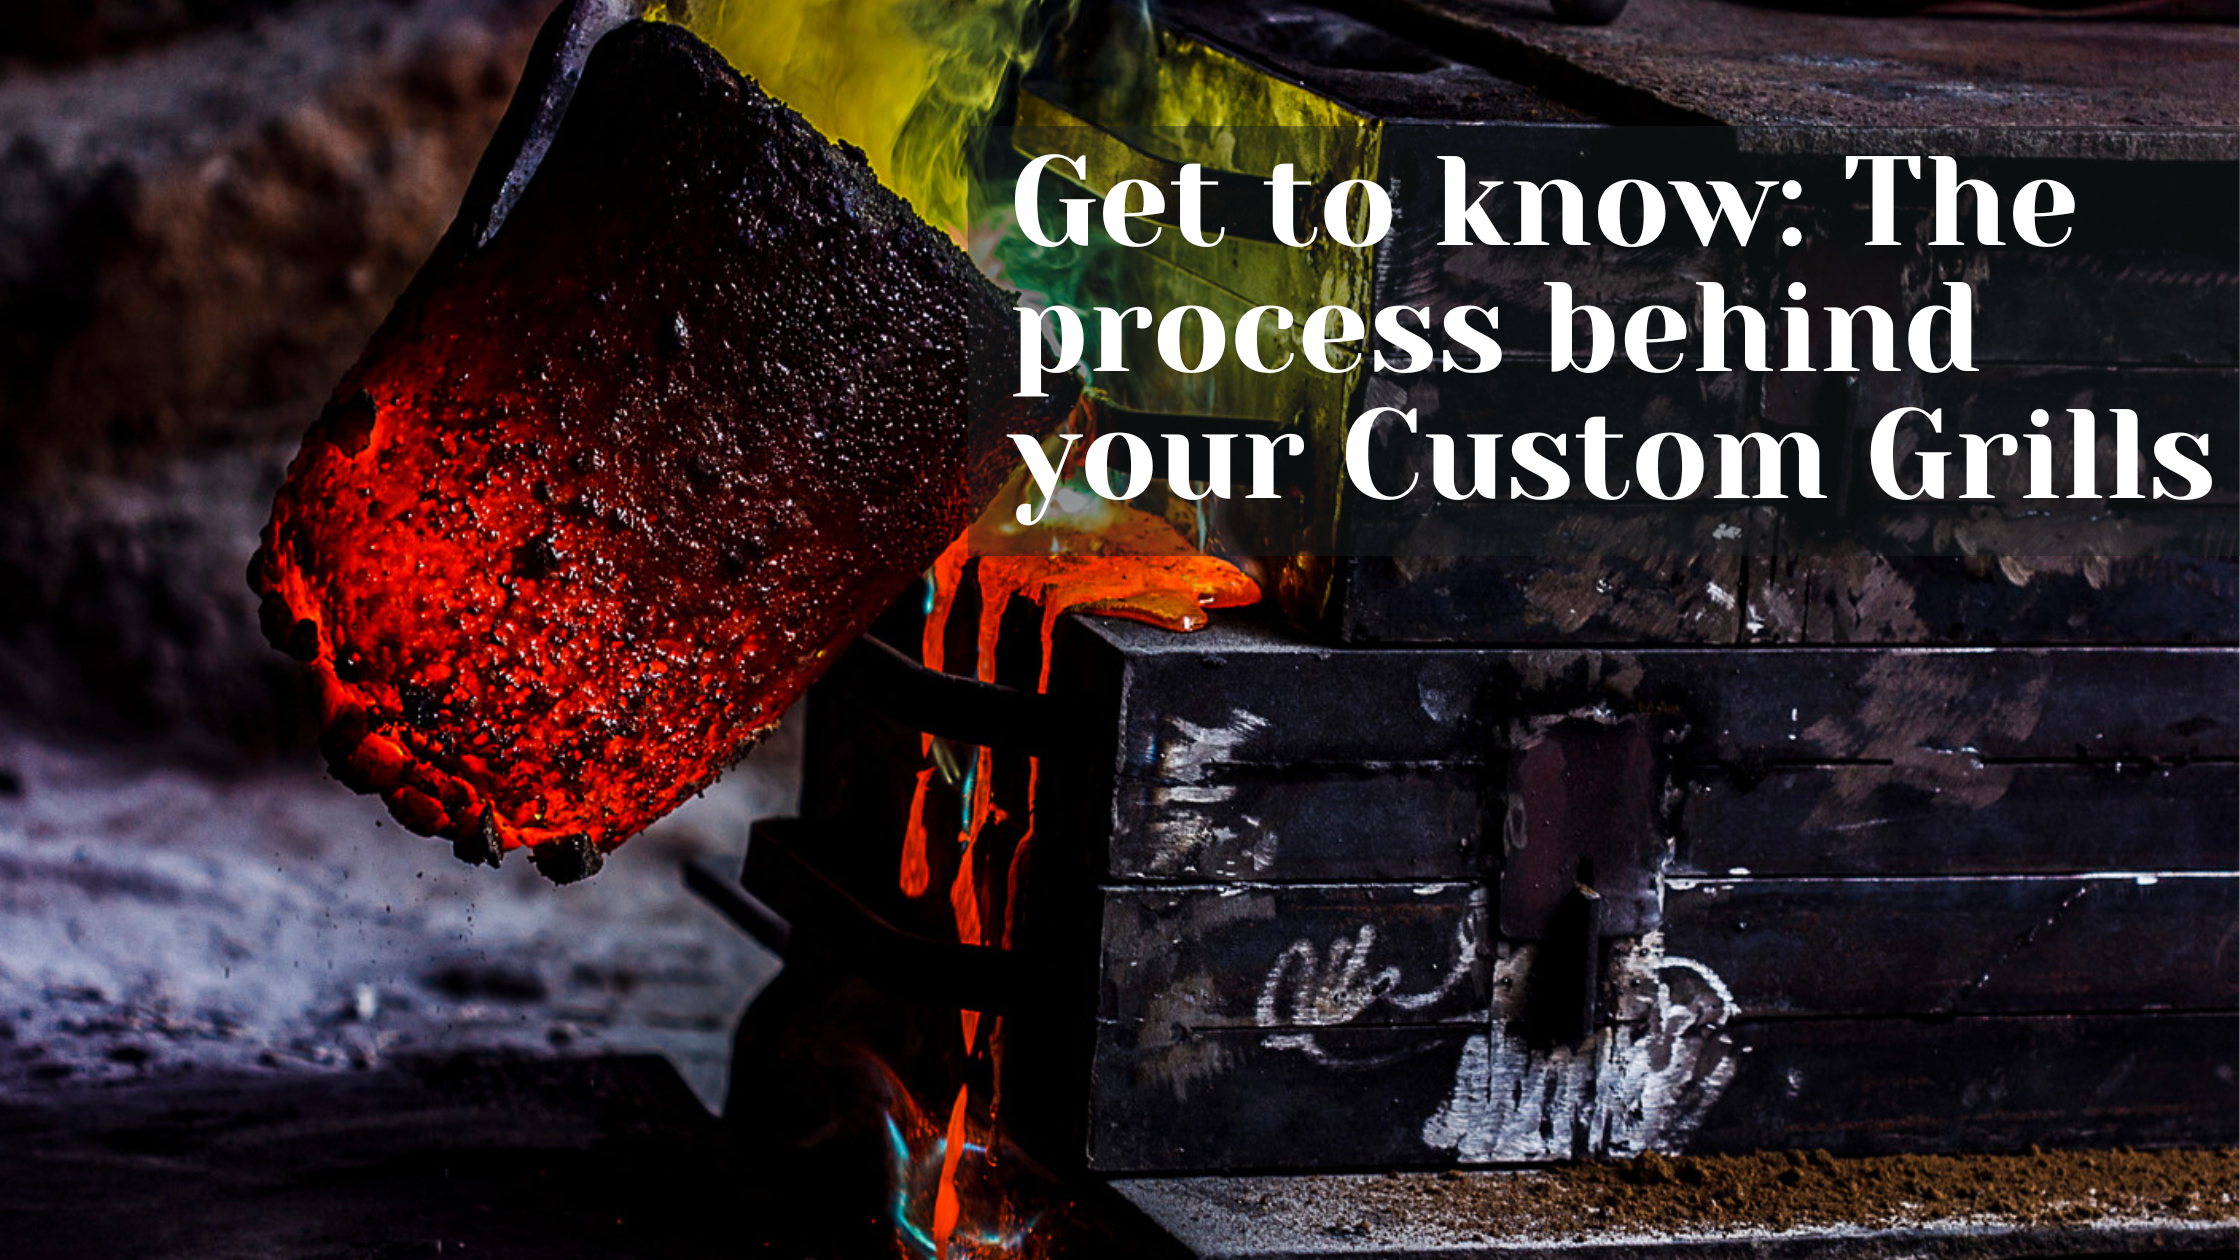 Get to know: The process behind your Custom Grills